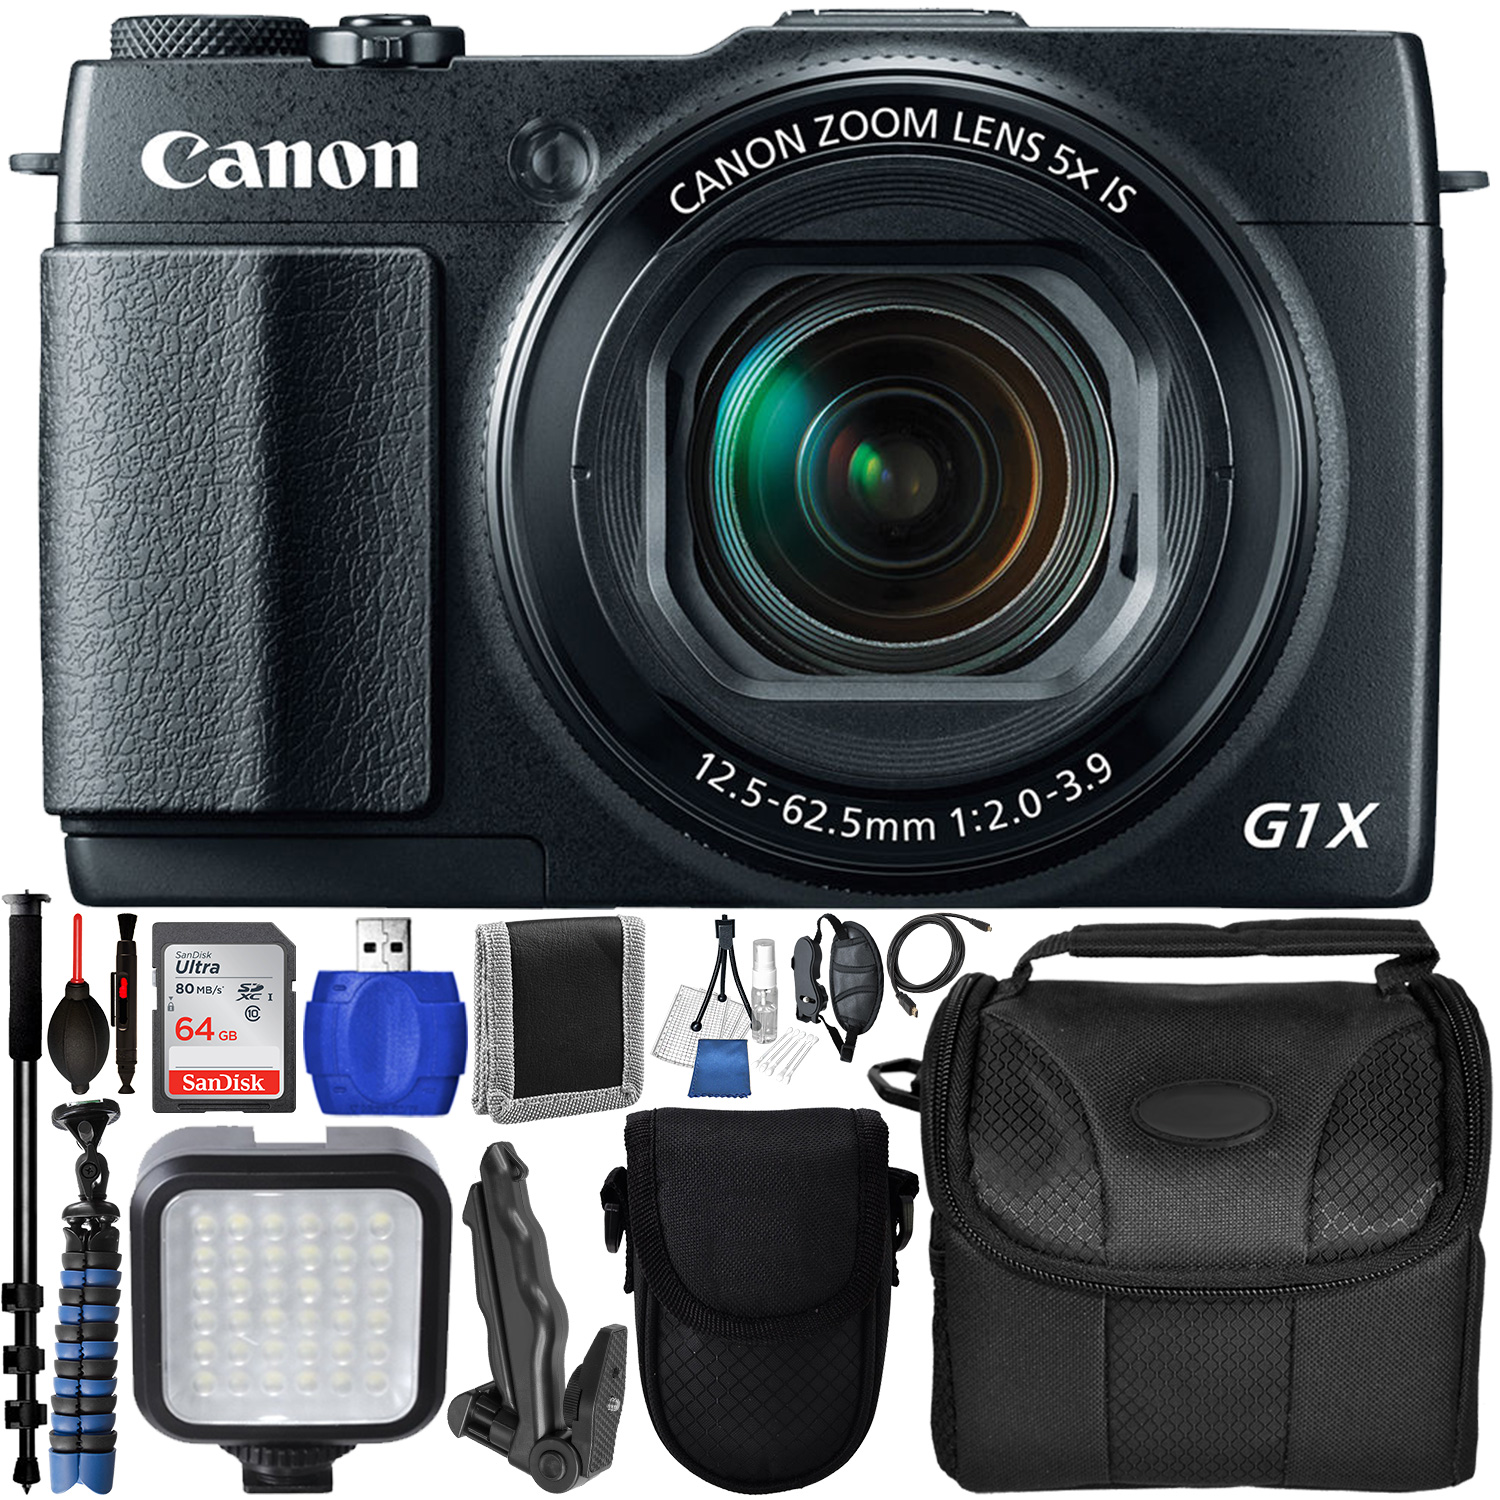 Canon PowerShot G1 X Mark II Digital Camera - 9167B001 with Deluxe 14pc Accessory Bundle